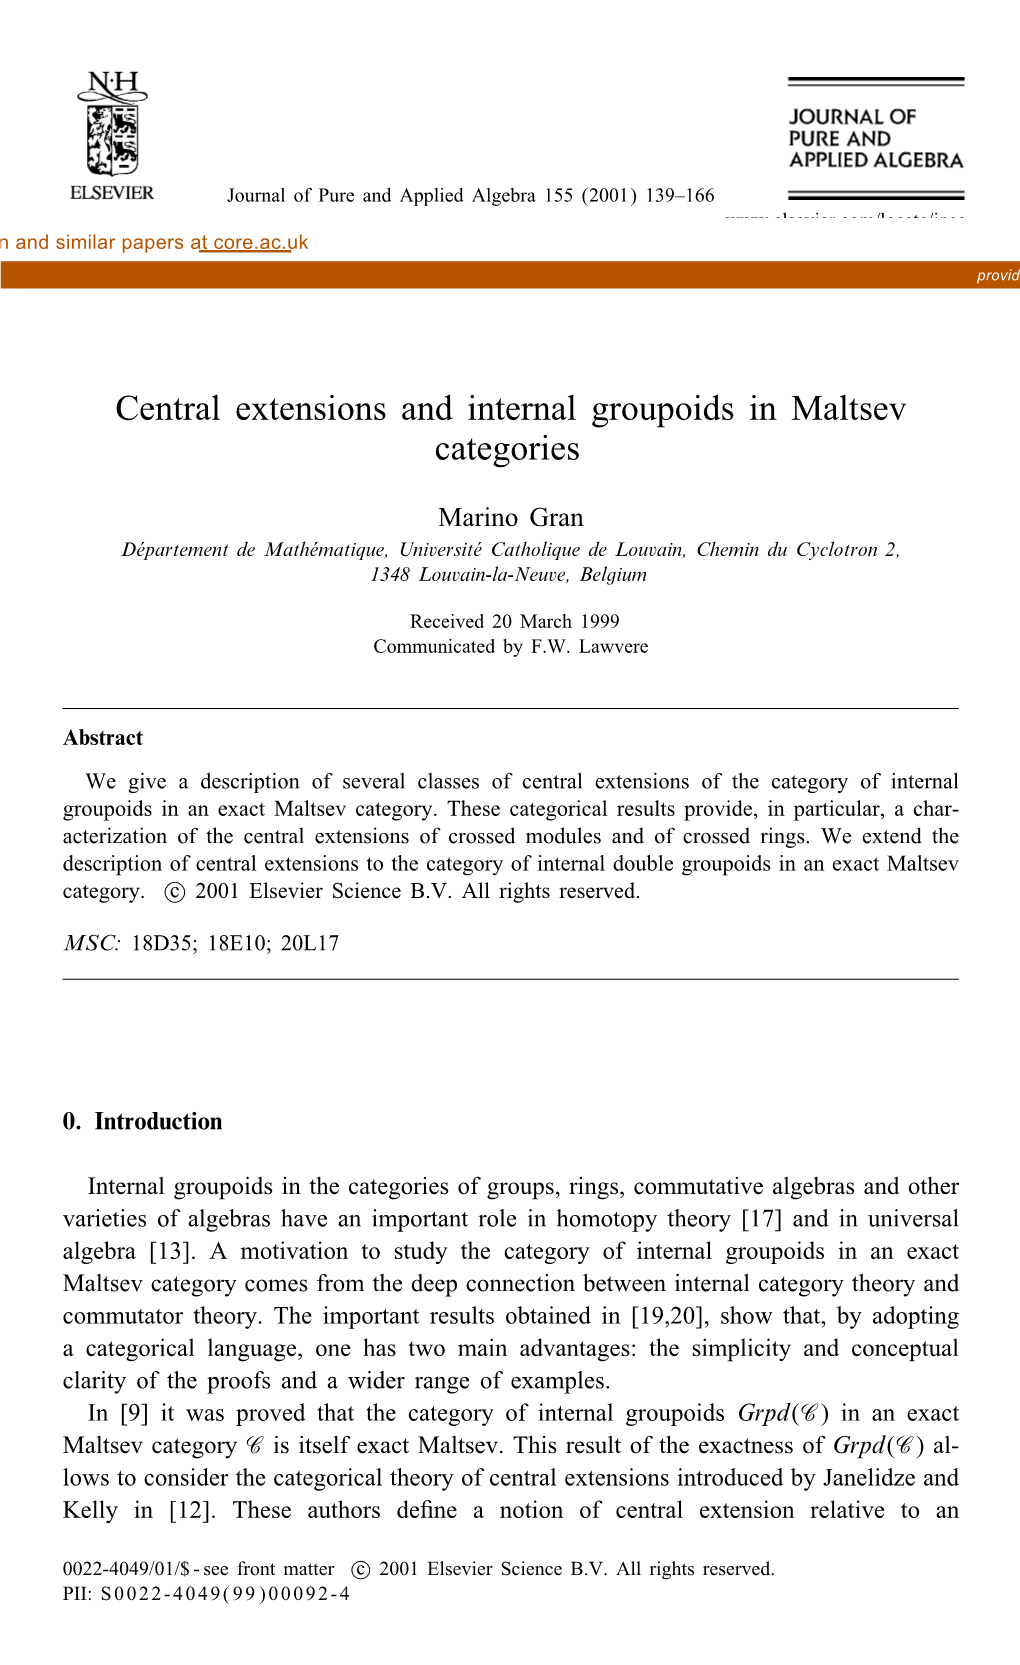 Central Extensions and Internal Groupoids in Maltsev Categories